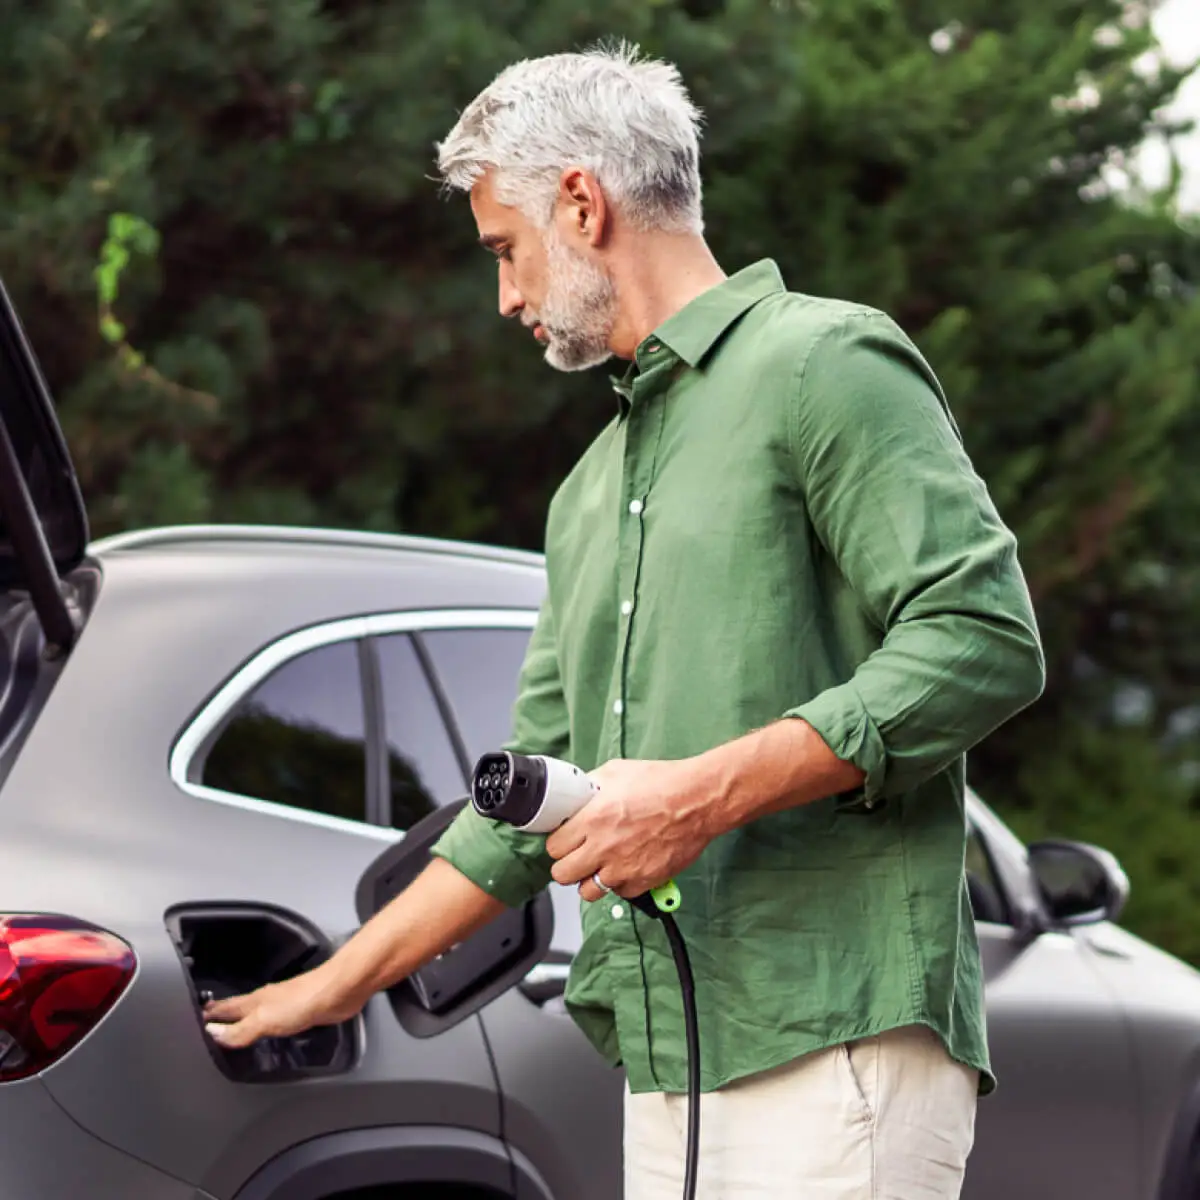 Older man in green linen shirt, opens plug cap on his electric vehicle to begin charging it.